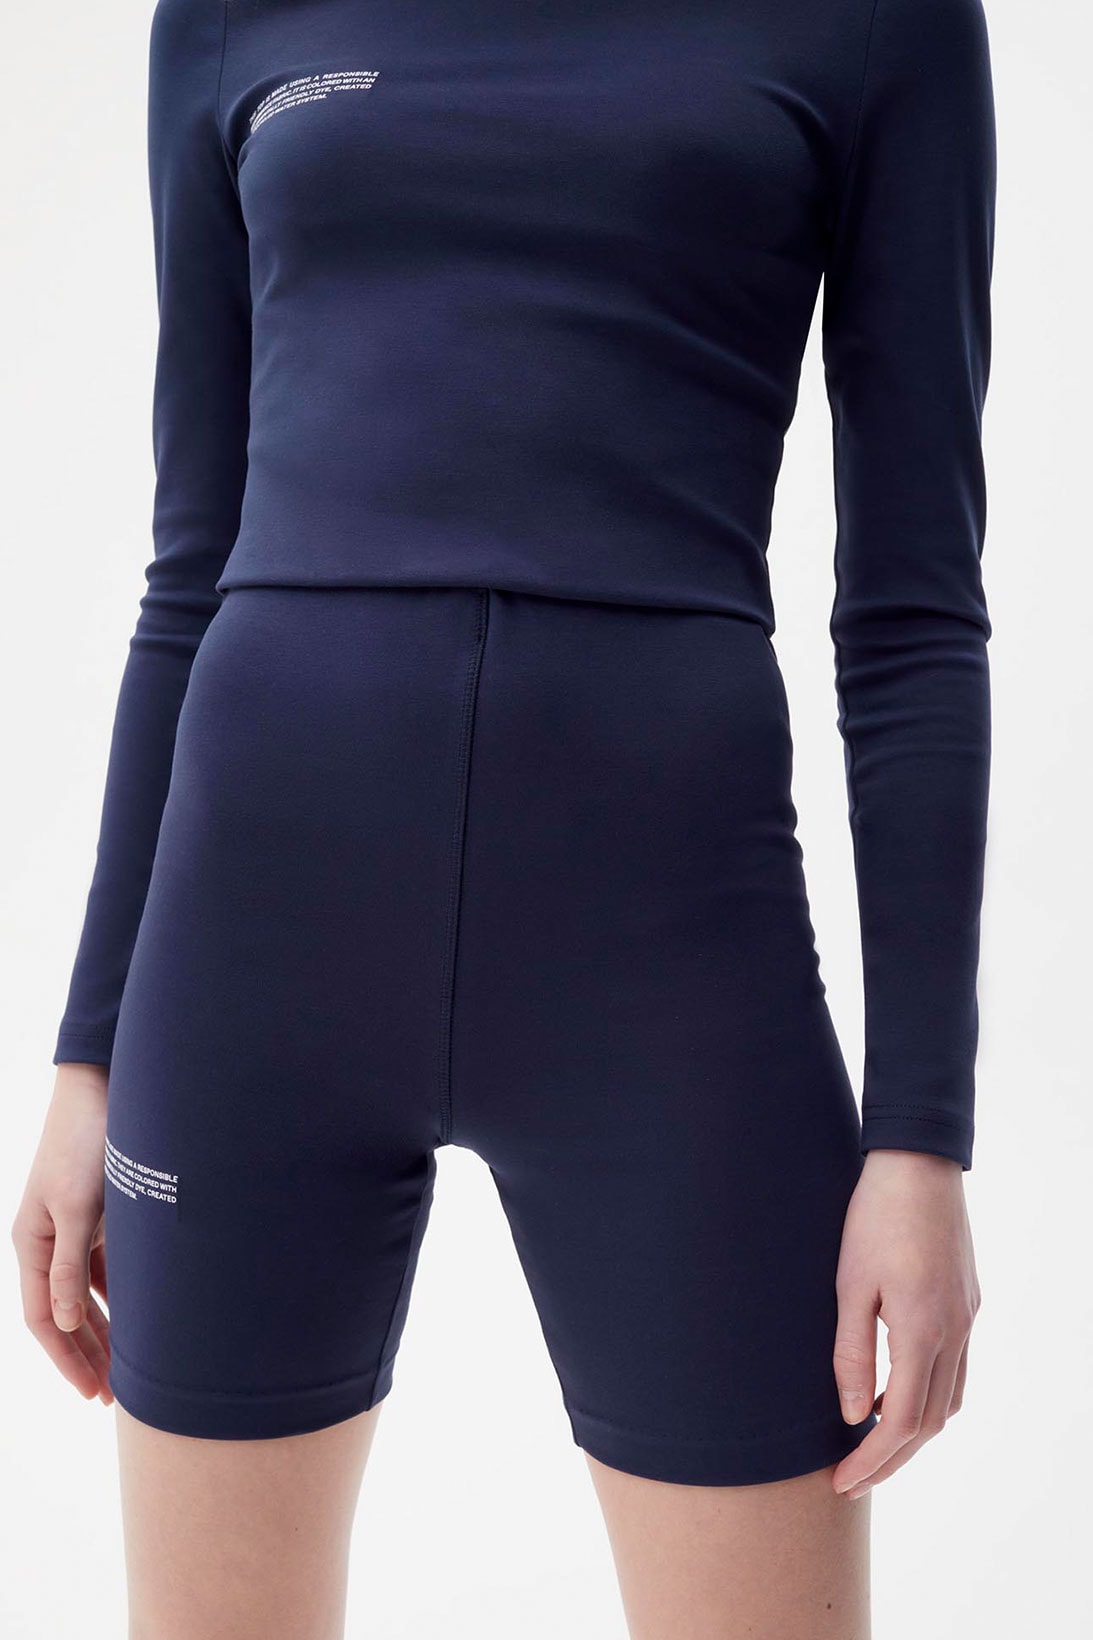 pangaia roica stretch athleisure sustainable collection turtleneck top bike shorts navy